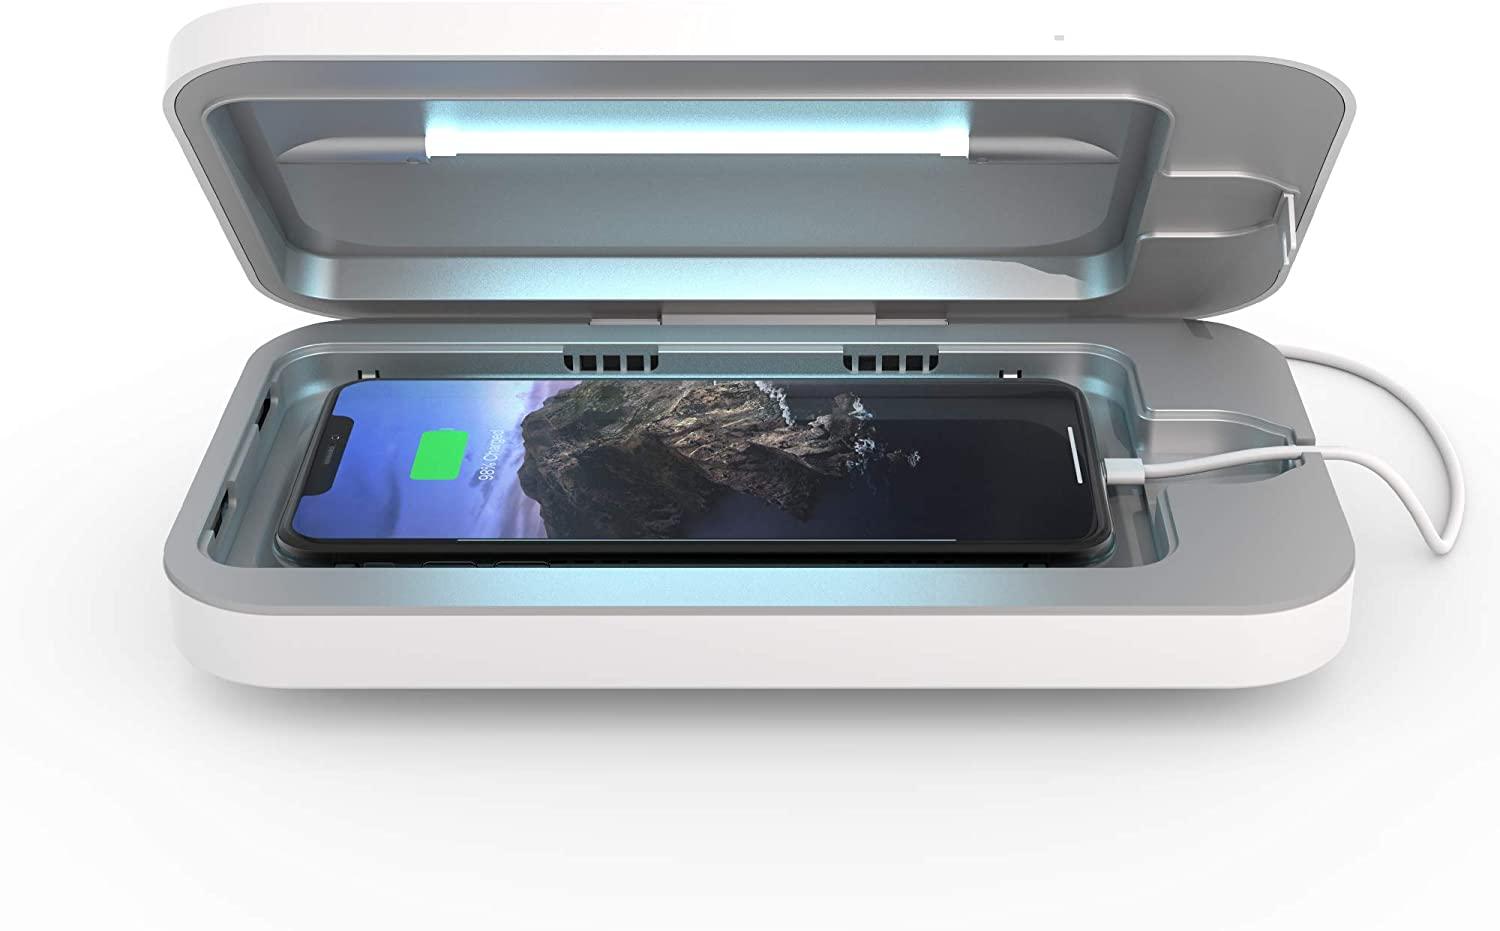 PhoneSoap 3 UV Smartphone Sanitizer and Universal Charger for $41.99 Shipped